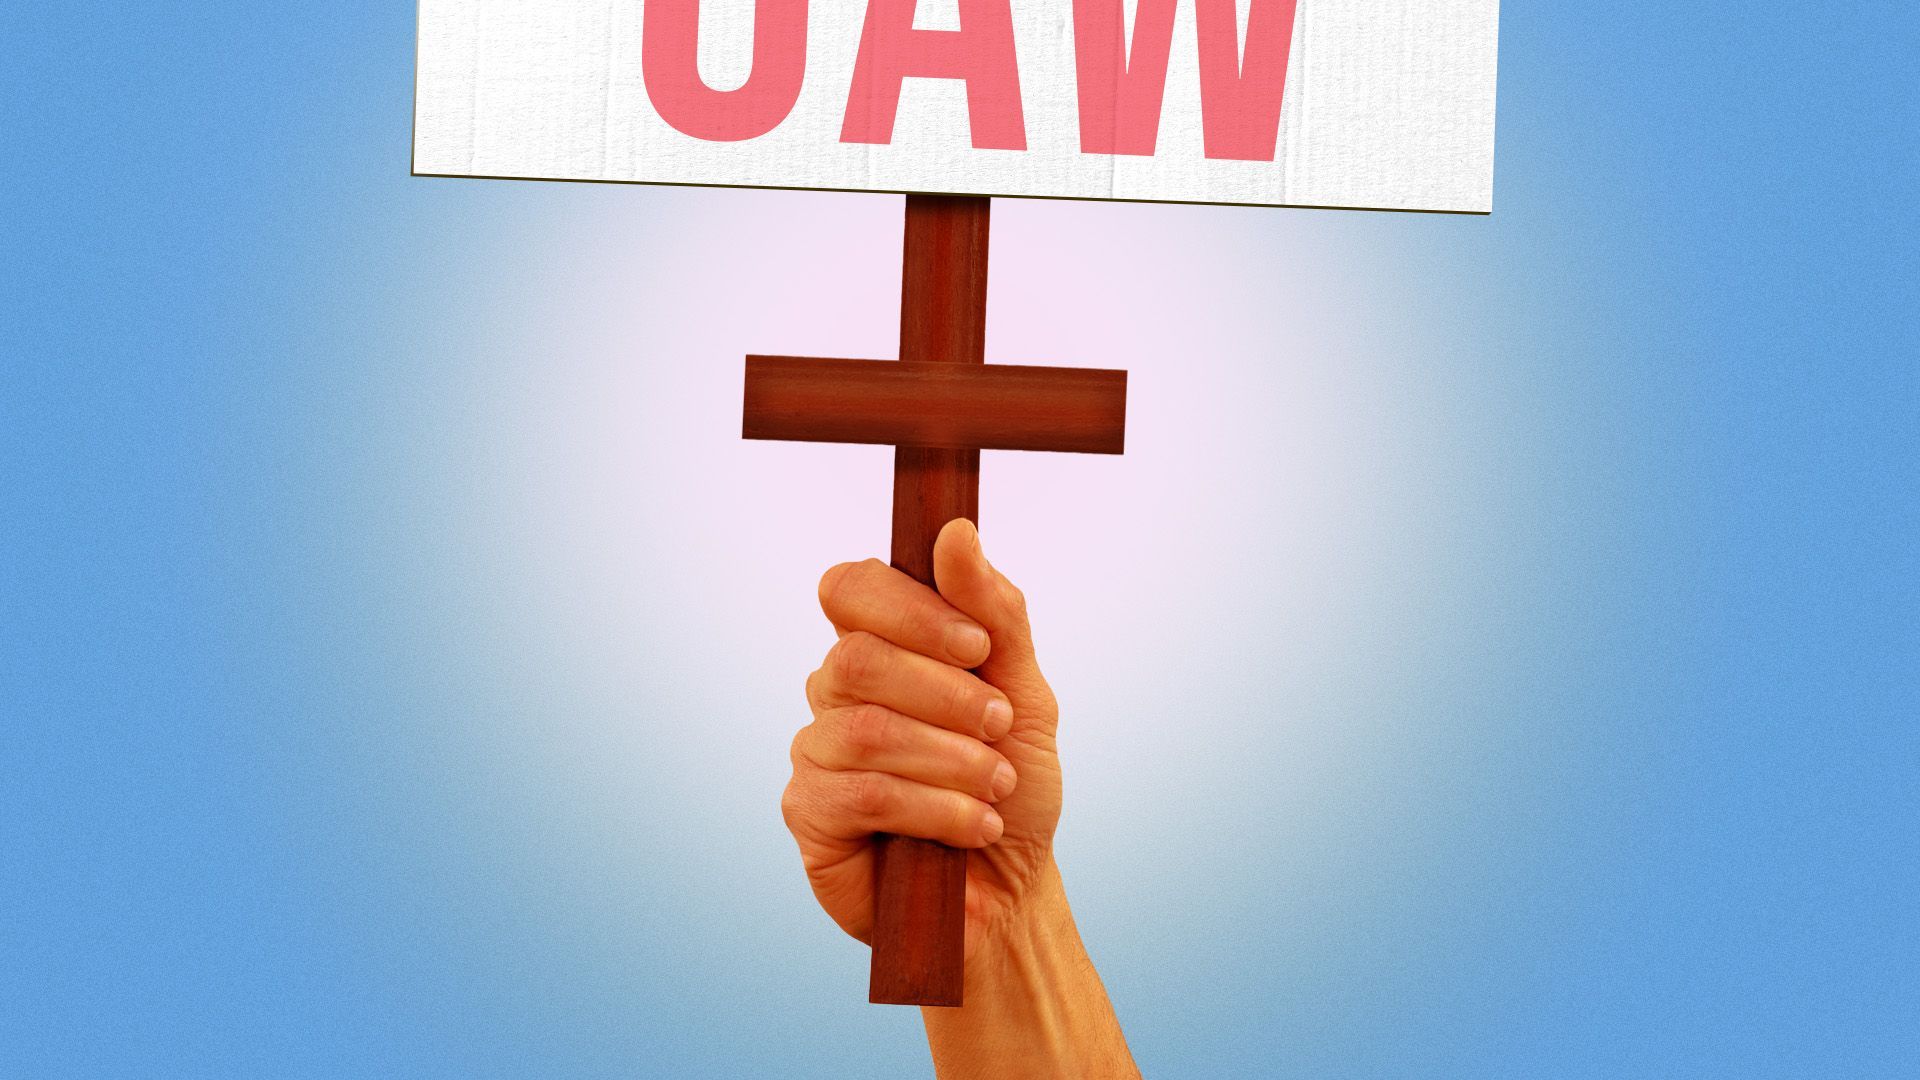 Illustration of a hand holding a "UAW" protest sign in the shape of a Christian cross